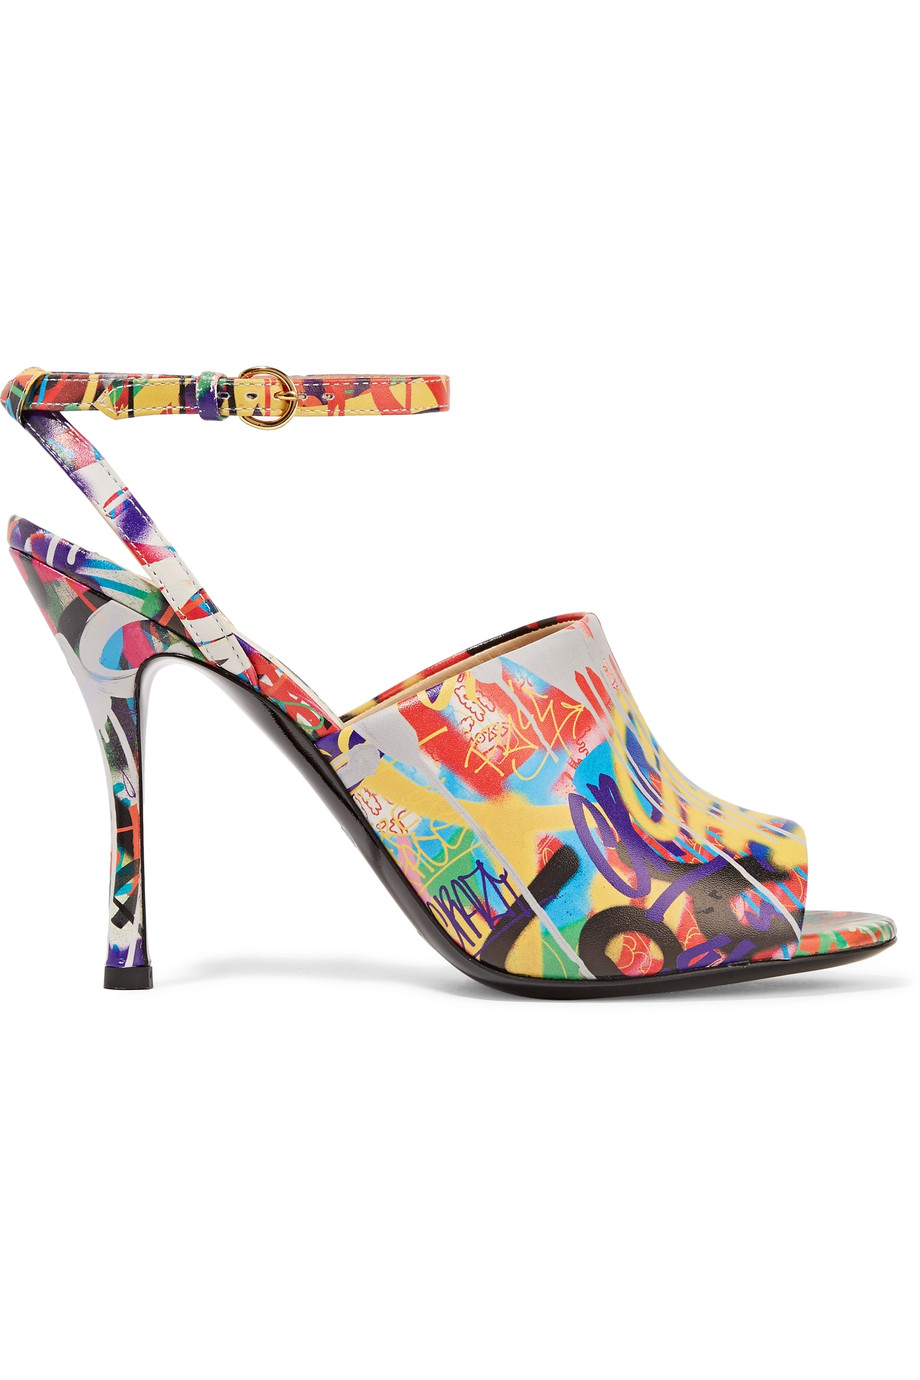 Moschino Printed Leather Sandals | ModeSens